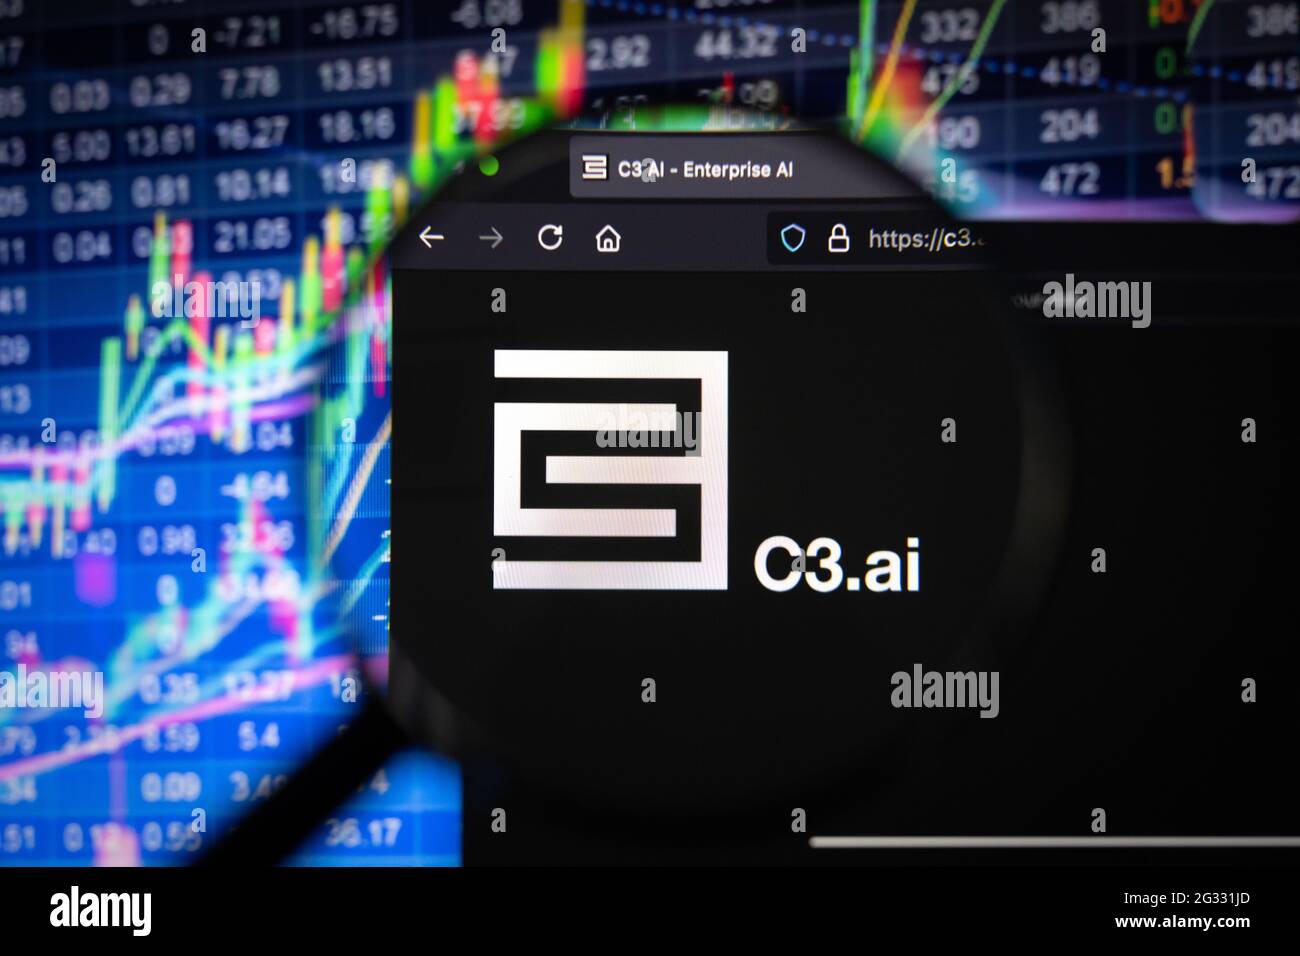 C3.ai company logo on a website with blurry stock market developments in the background, seen on a computer screen through a magnifying glass Stock Photo